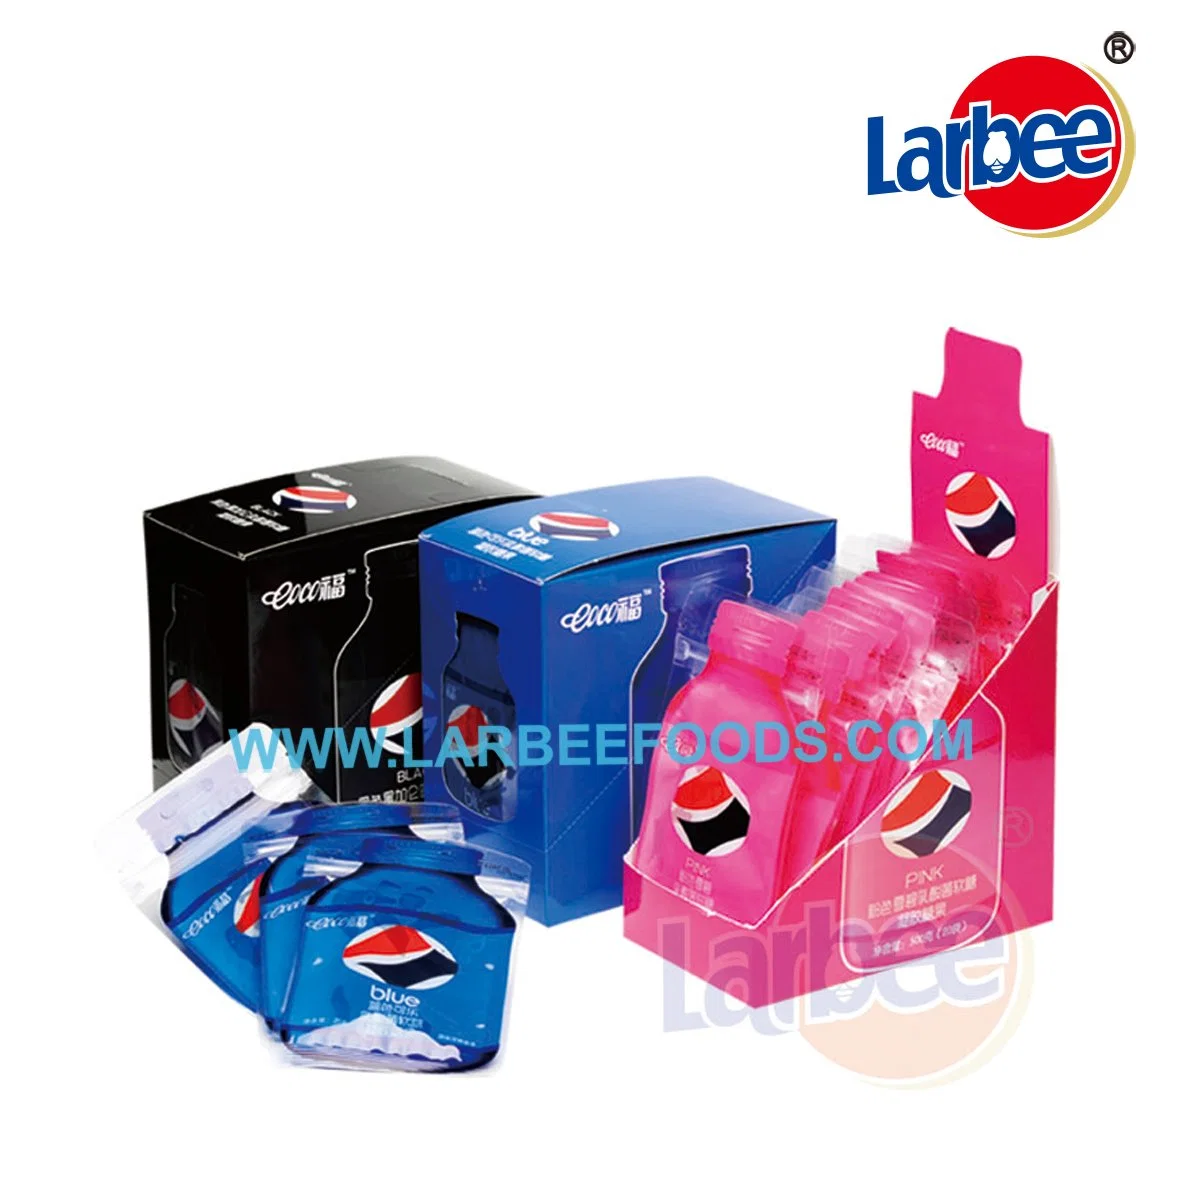 Cheap Chewing Gum Gummy Candy from Larbee Factory